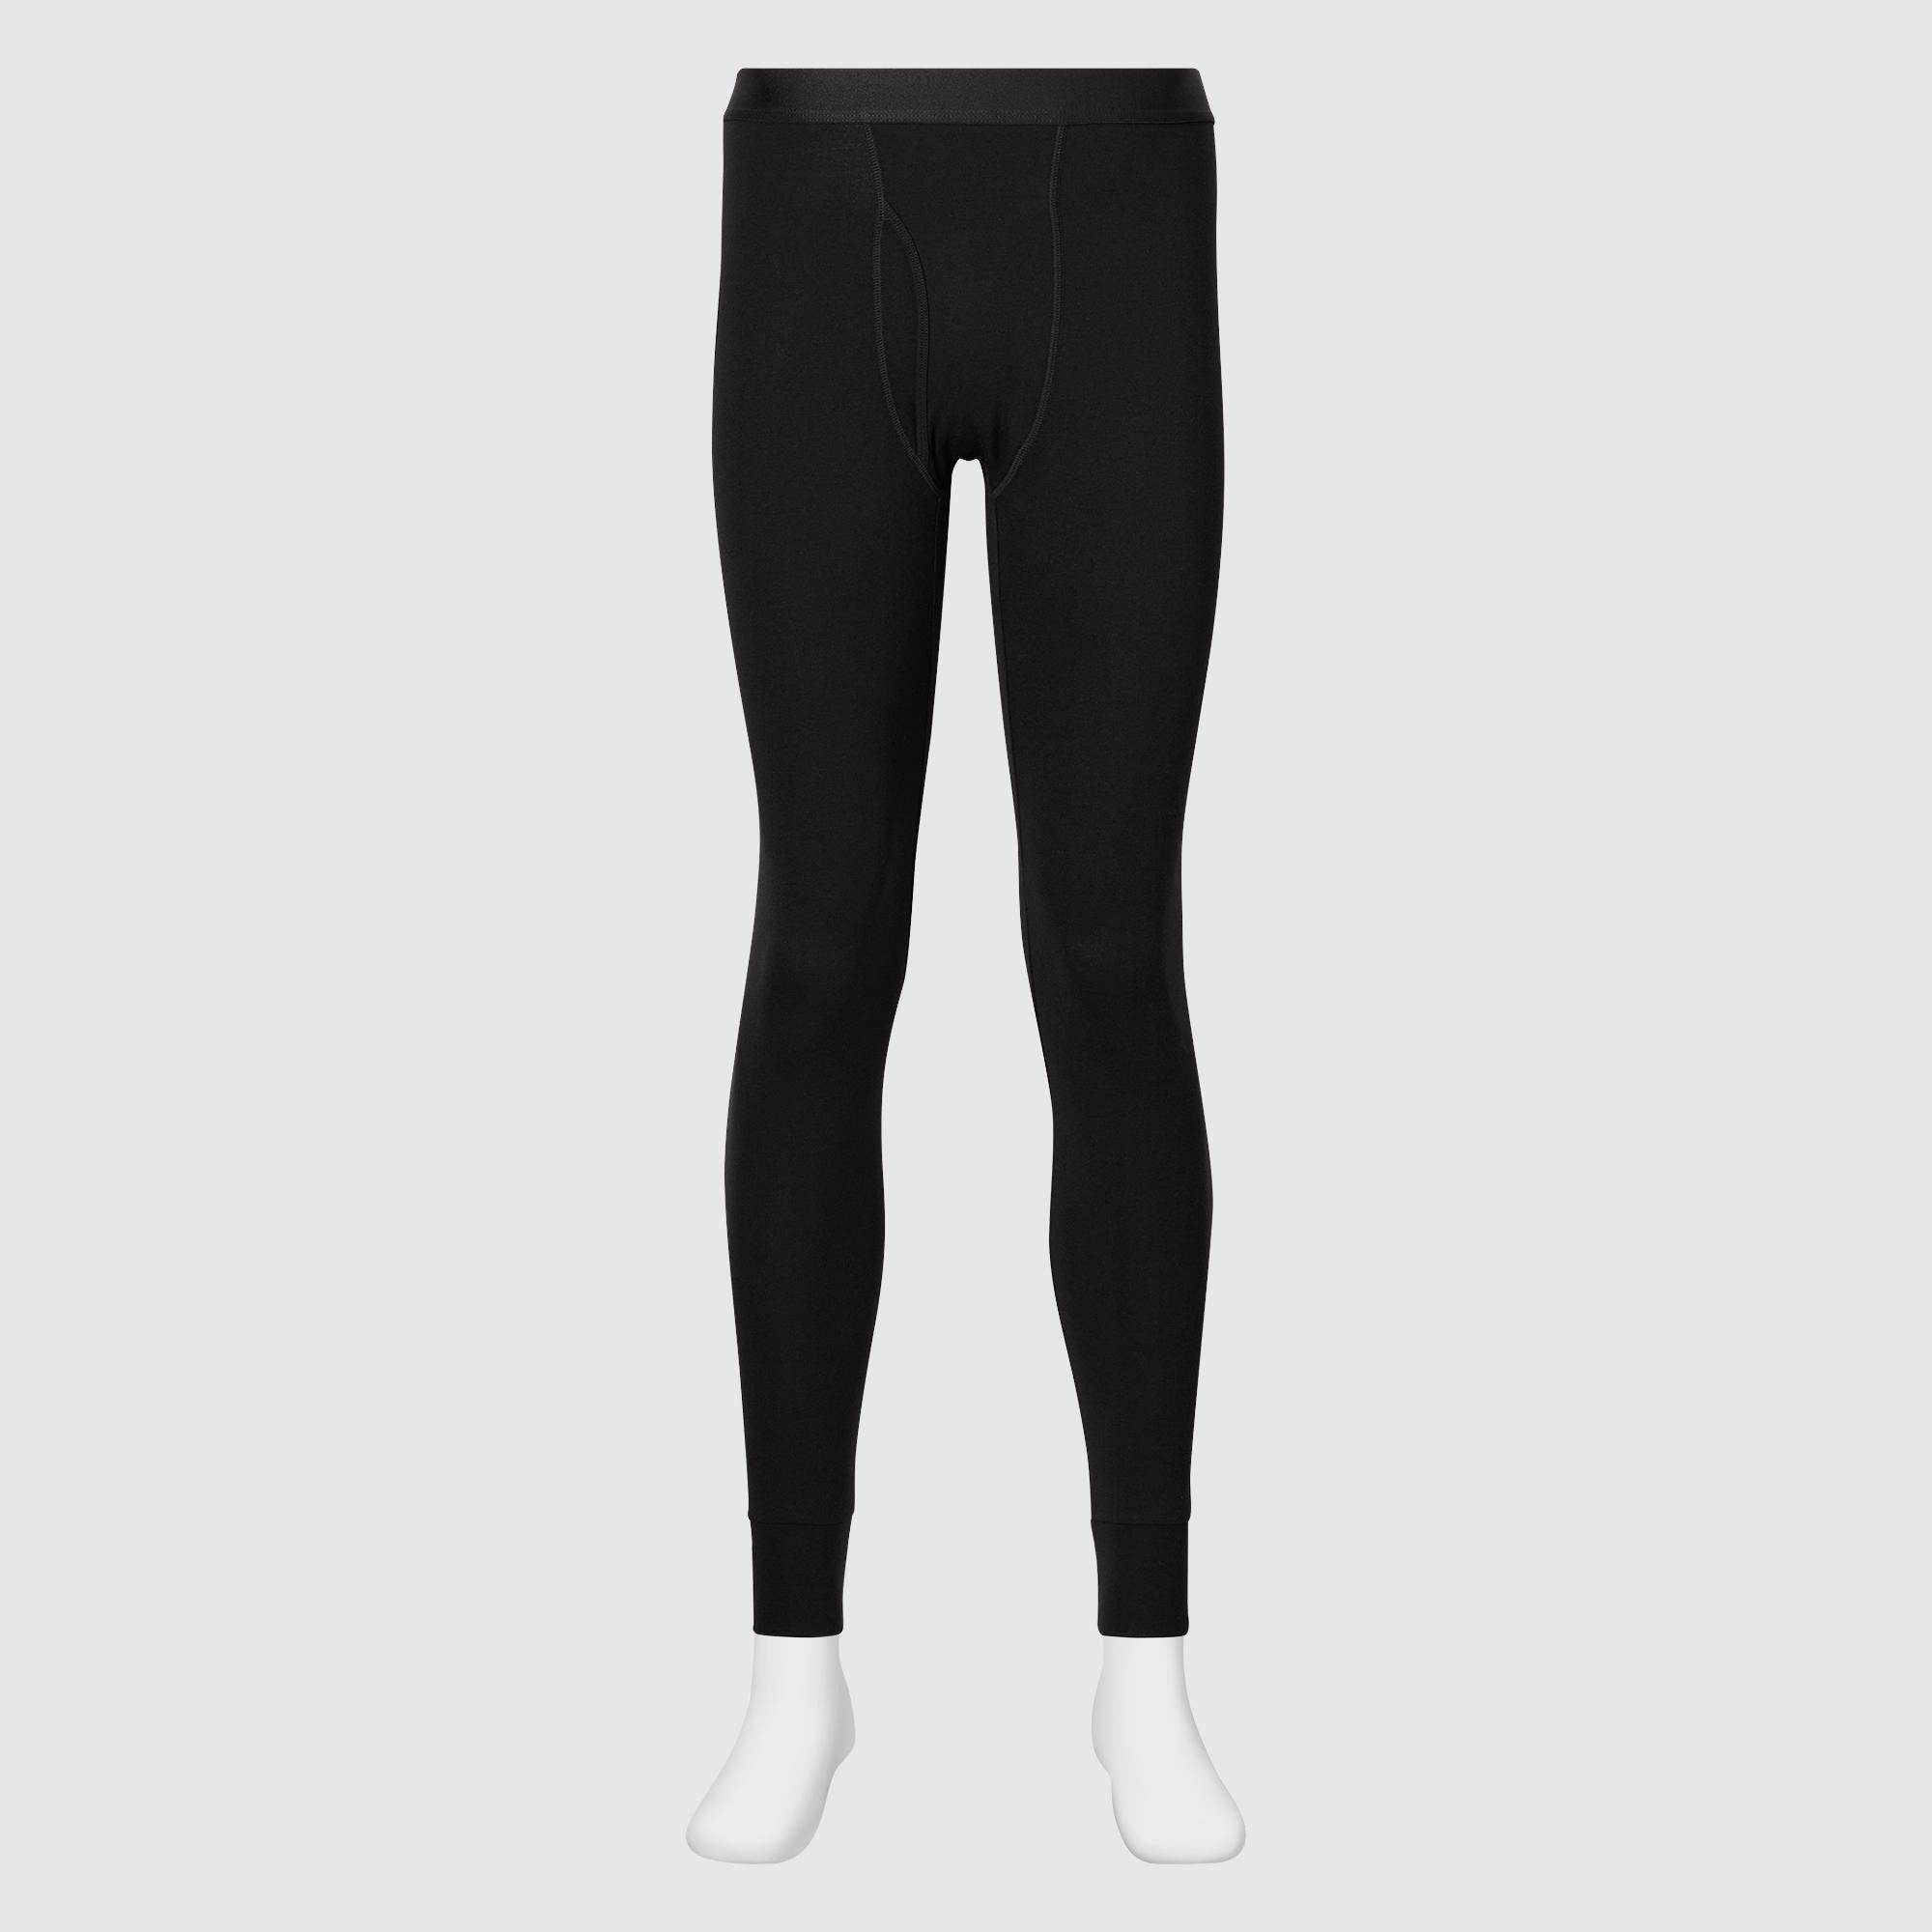 HEATTECH Cotton Tights (Extra Warm) by UNIQLO